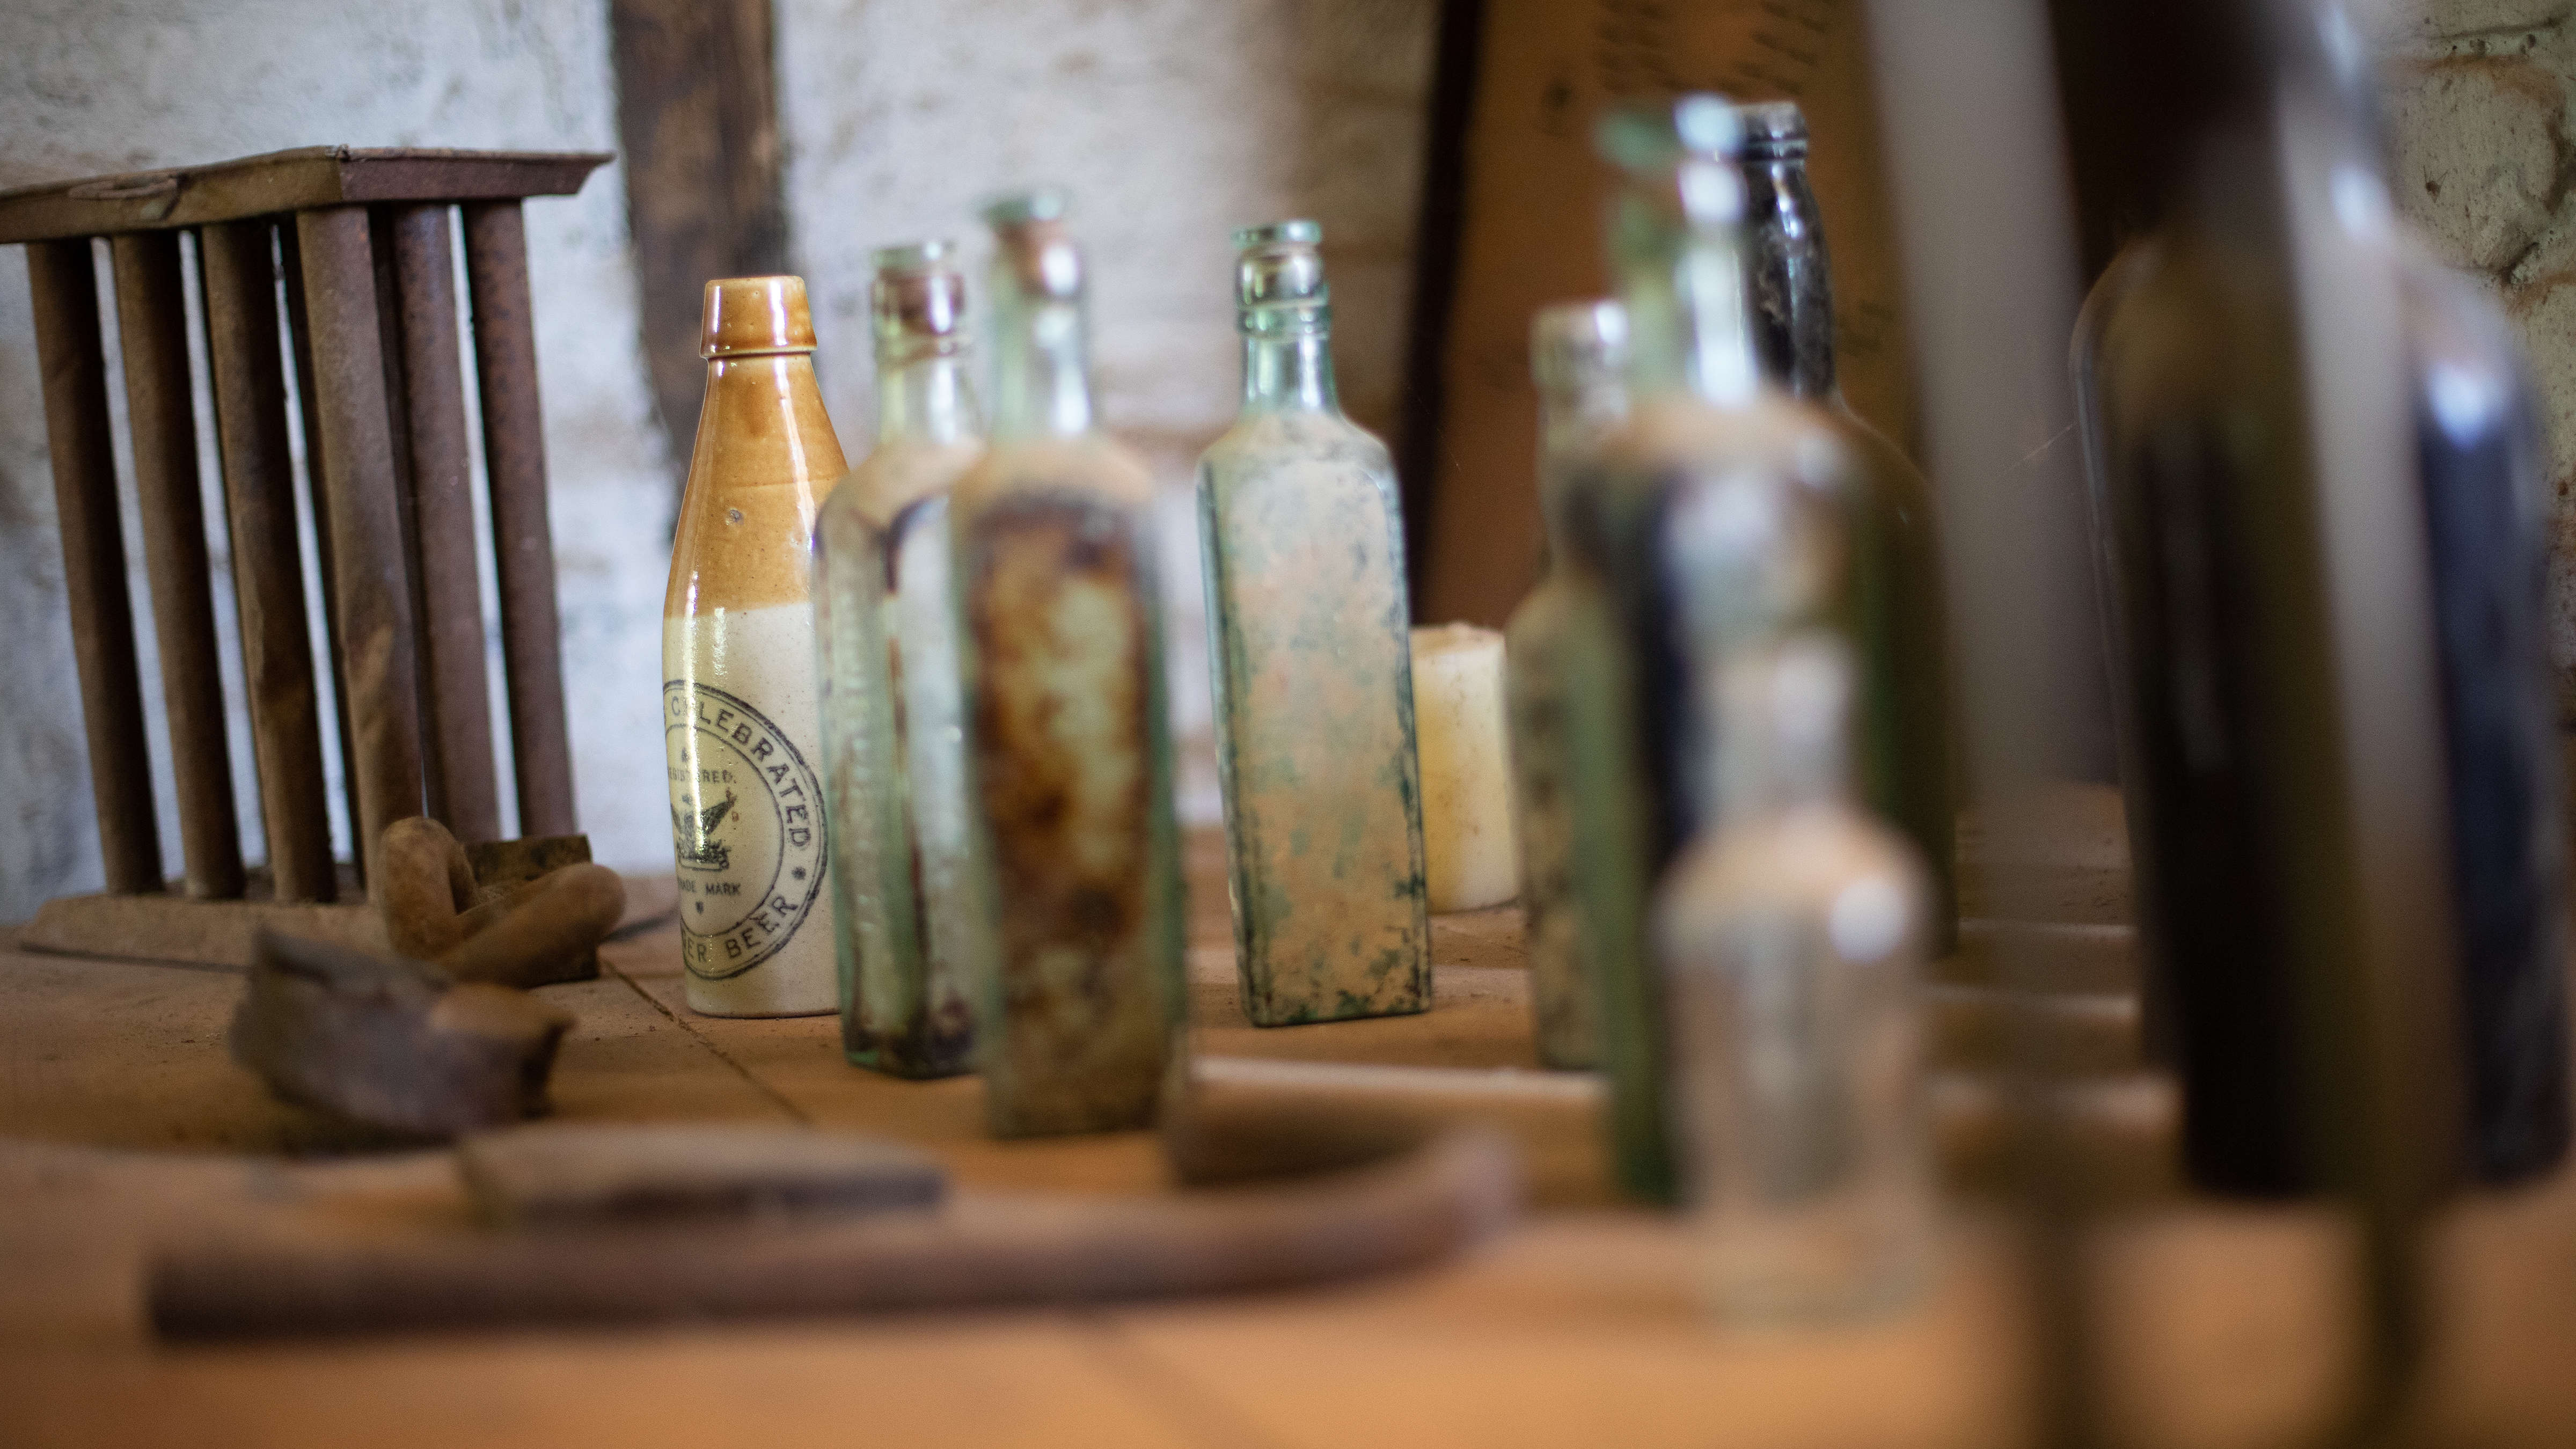 A collection of old glass and pottery bottles on a wooden table with a metal candlestick mould. Photo: Kieran Bradley.